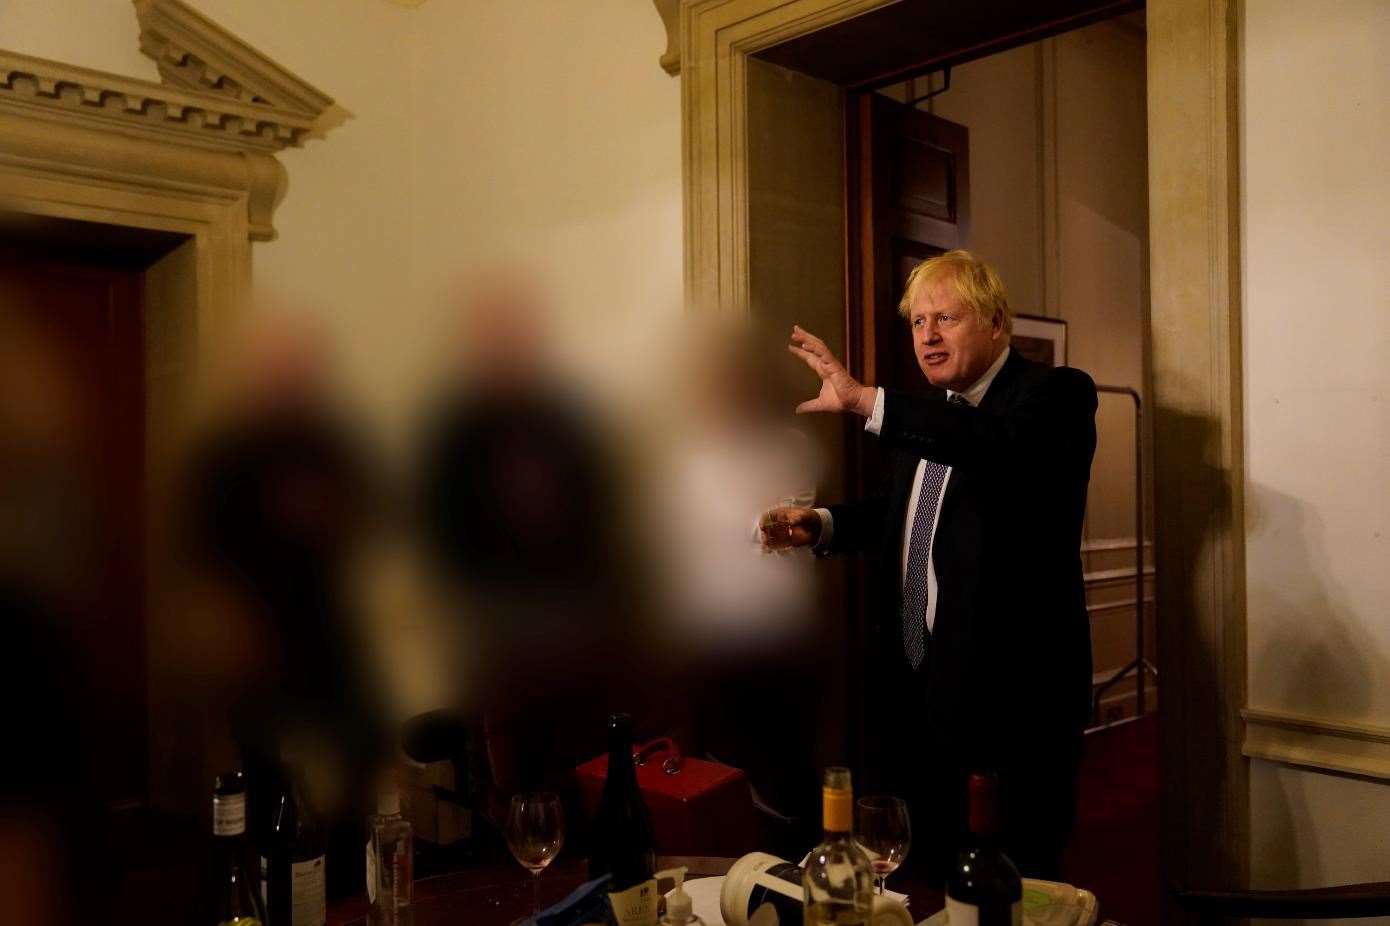 The then prime minister Boris Johnson at a gathering in 10 Downing Street during lockdown (Sue Gray Report/Cabinet Office/PA)